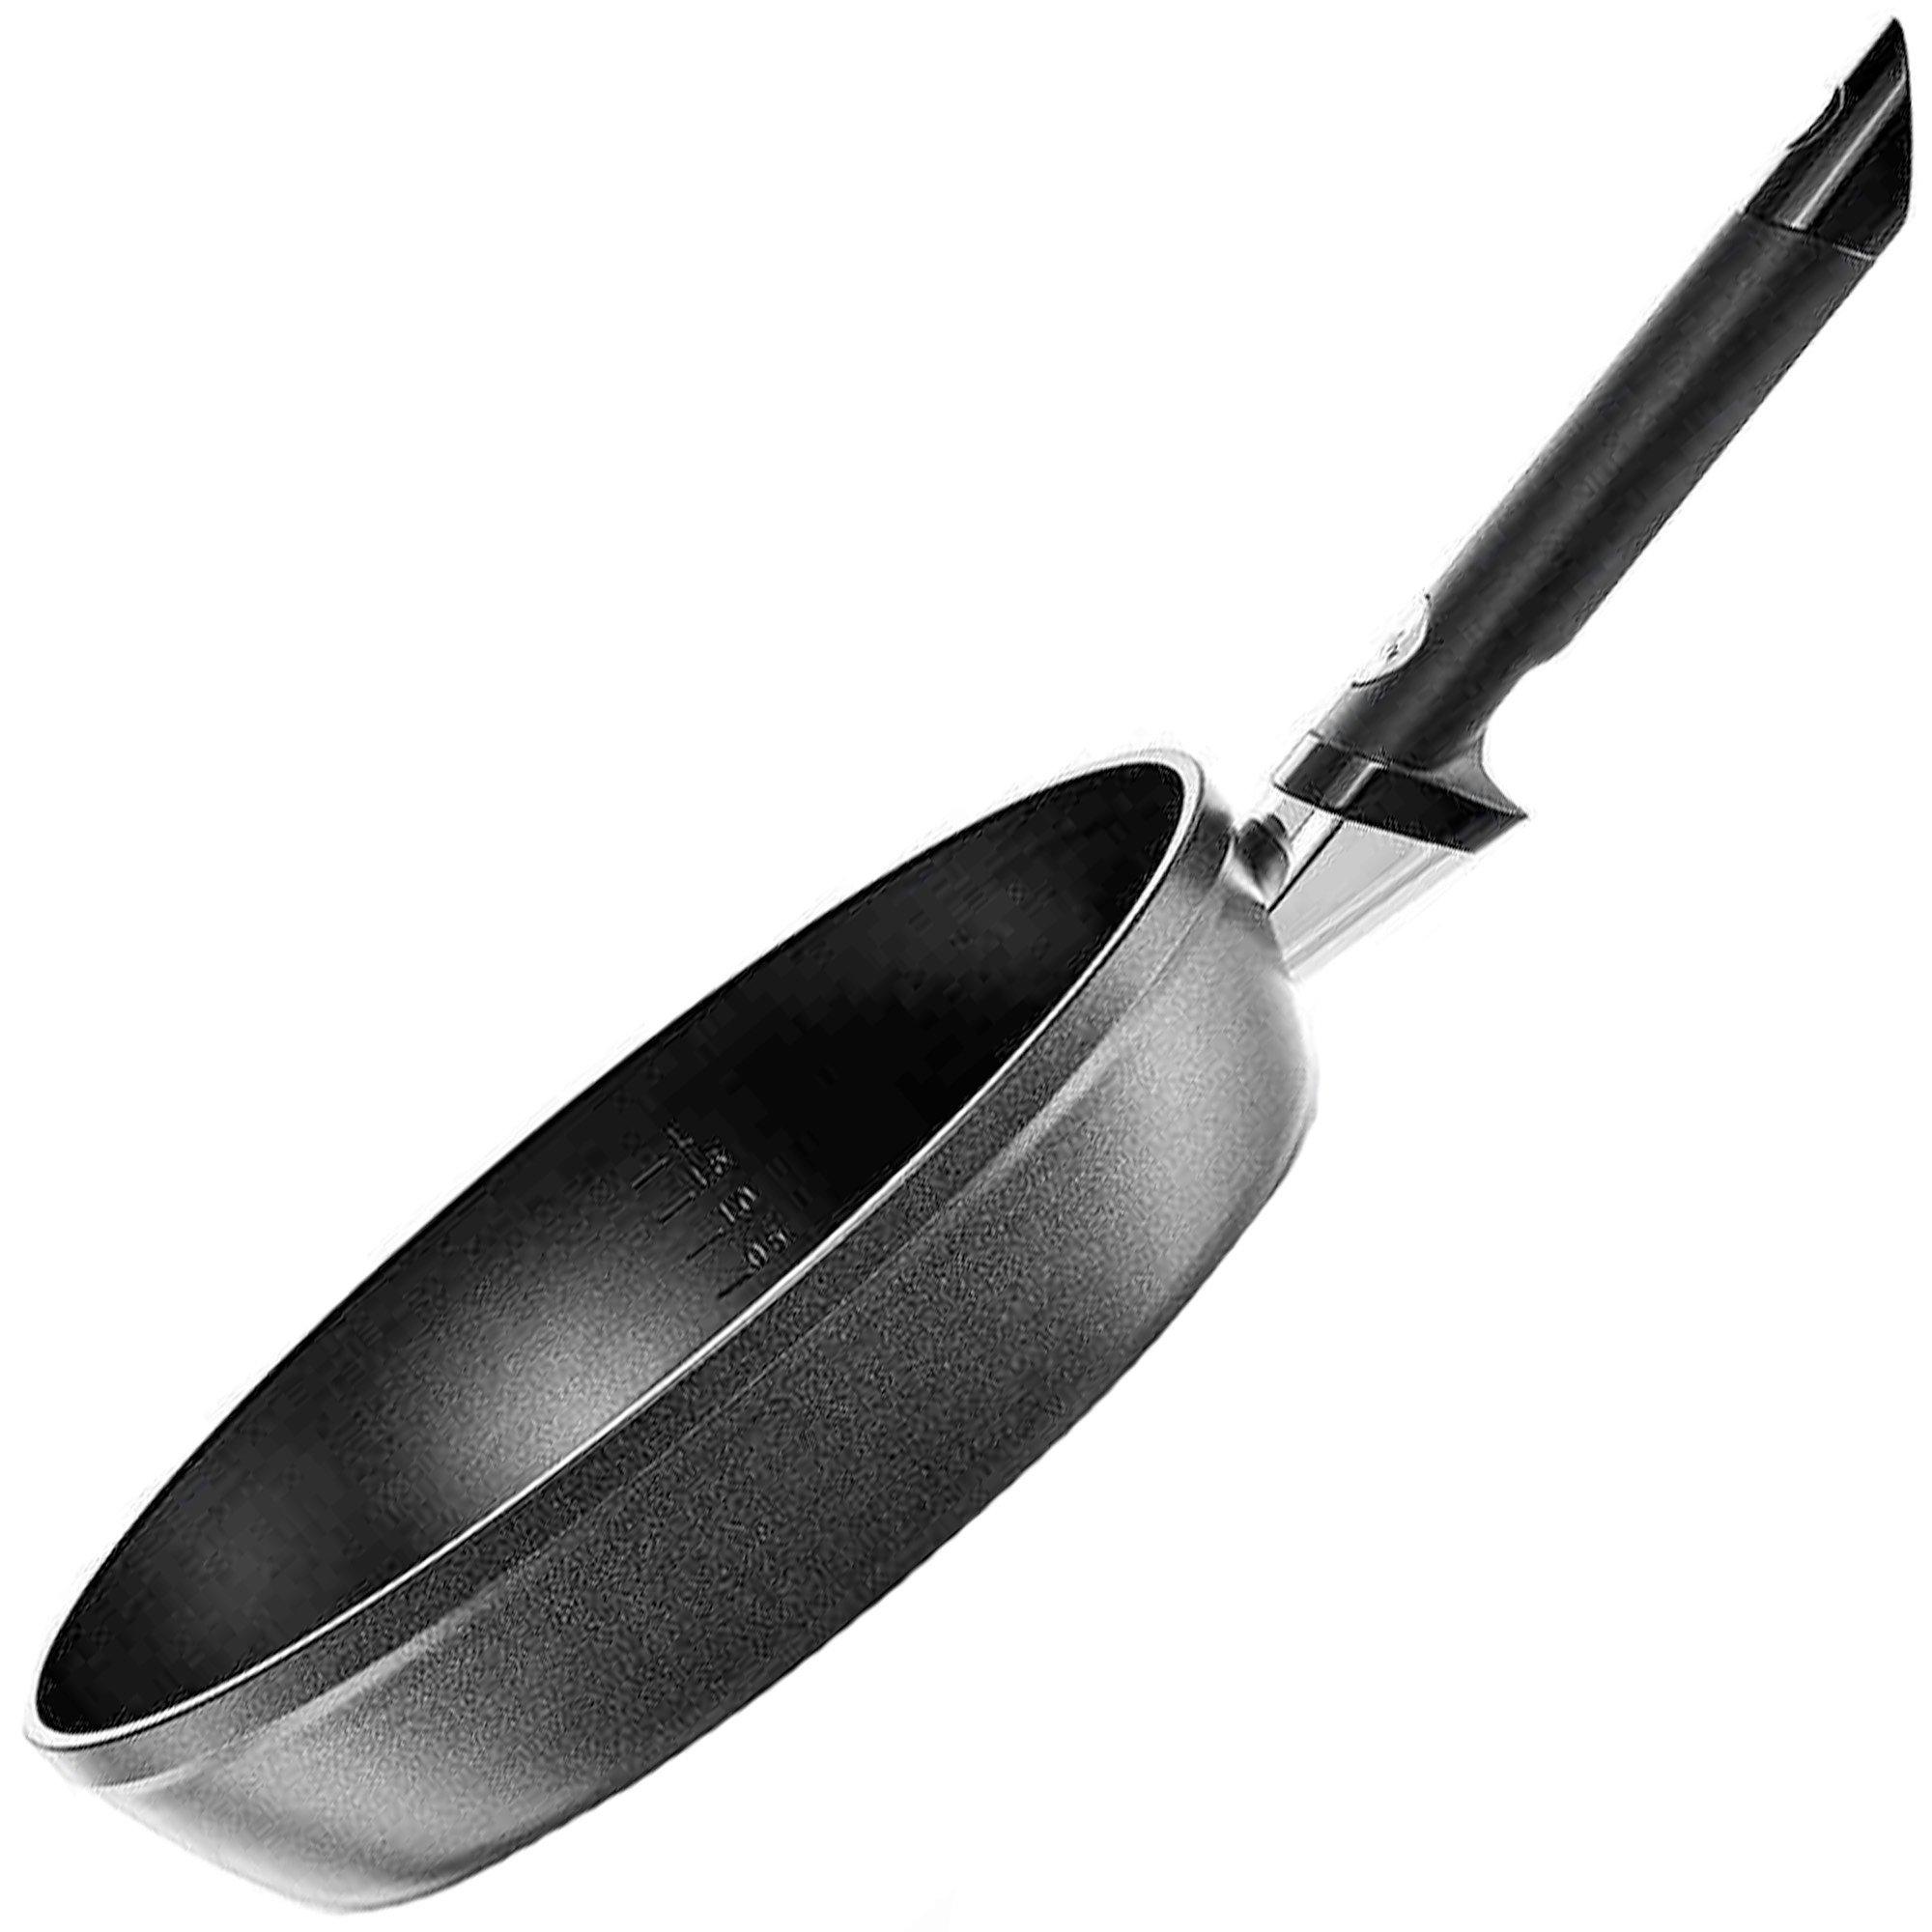 Fissler Levital pan shopping | frying 157-121-28-100-0 Classic at 28cm Advantageously